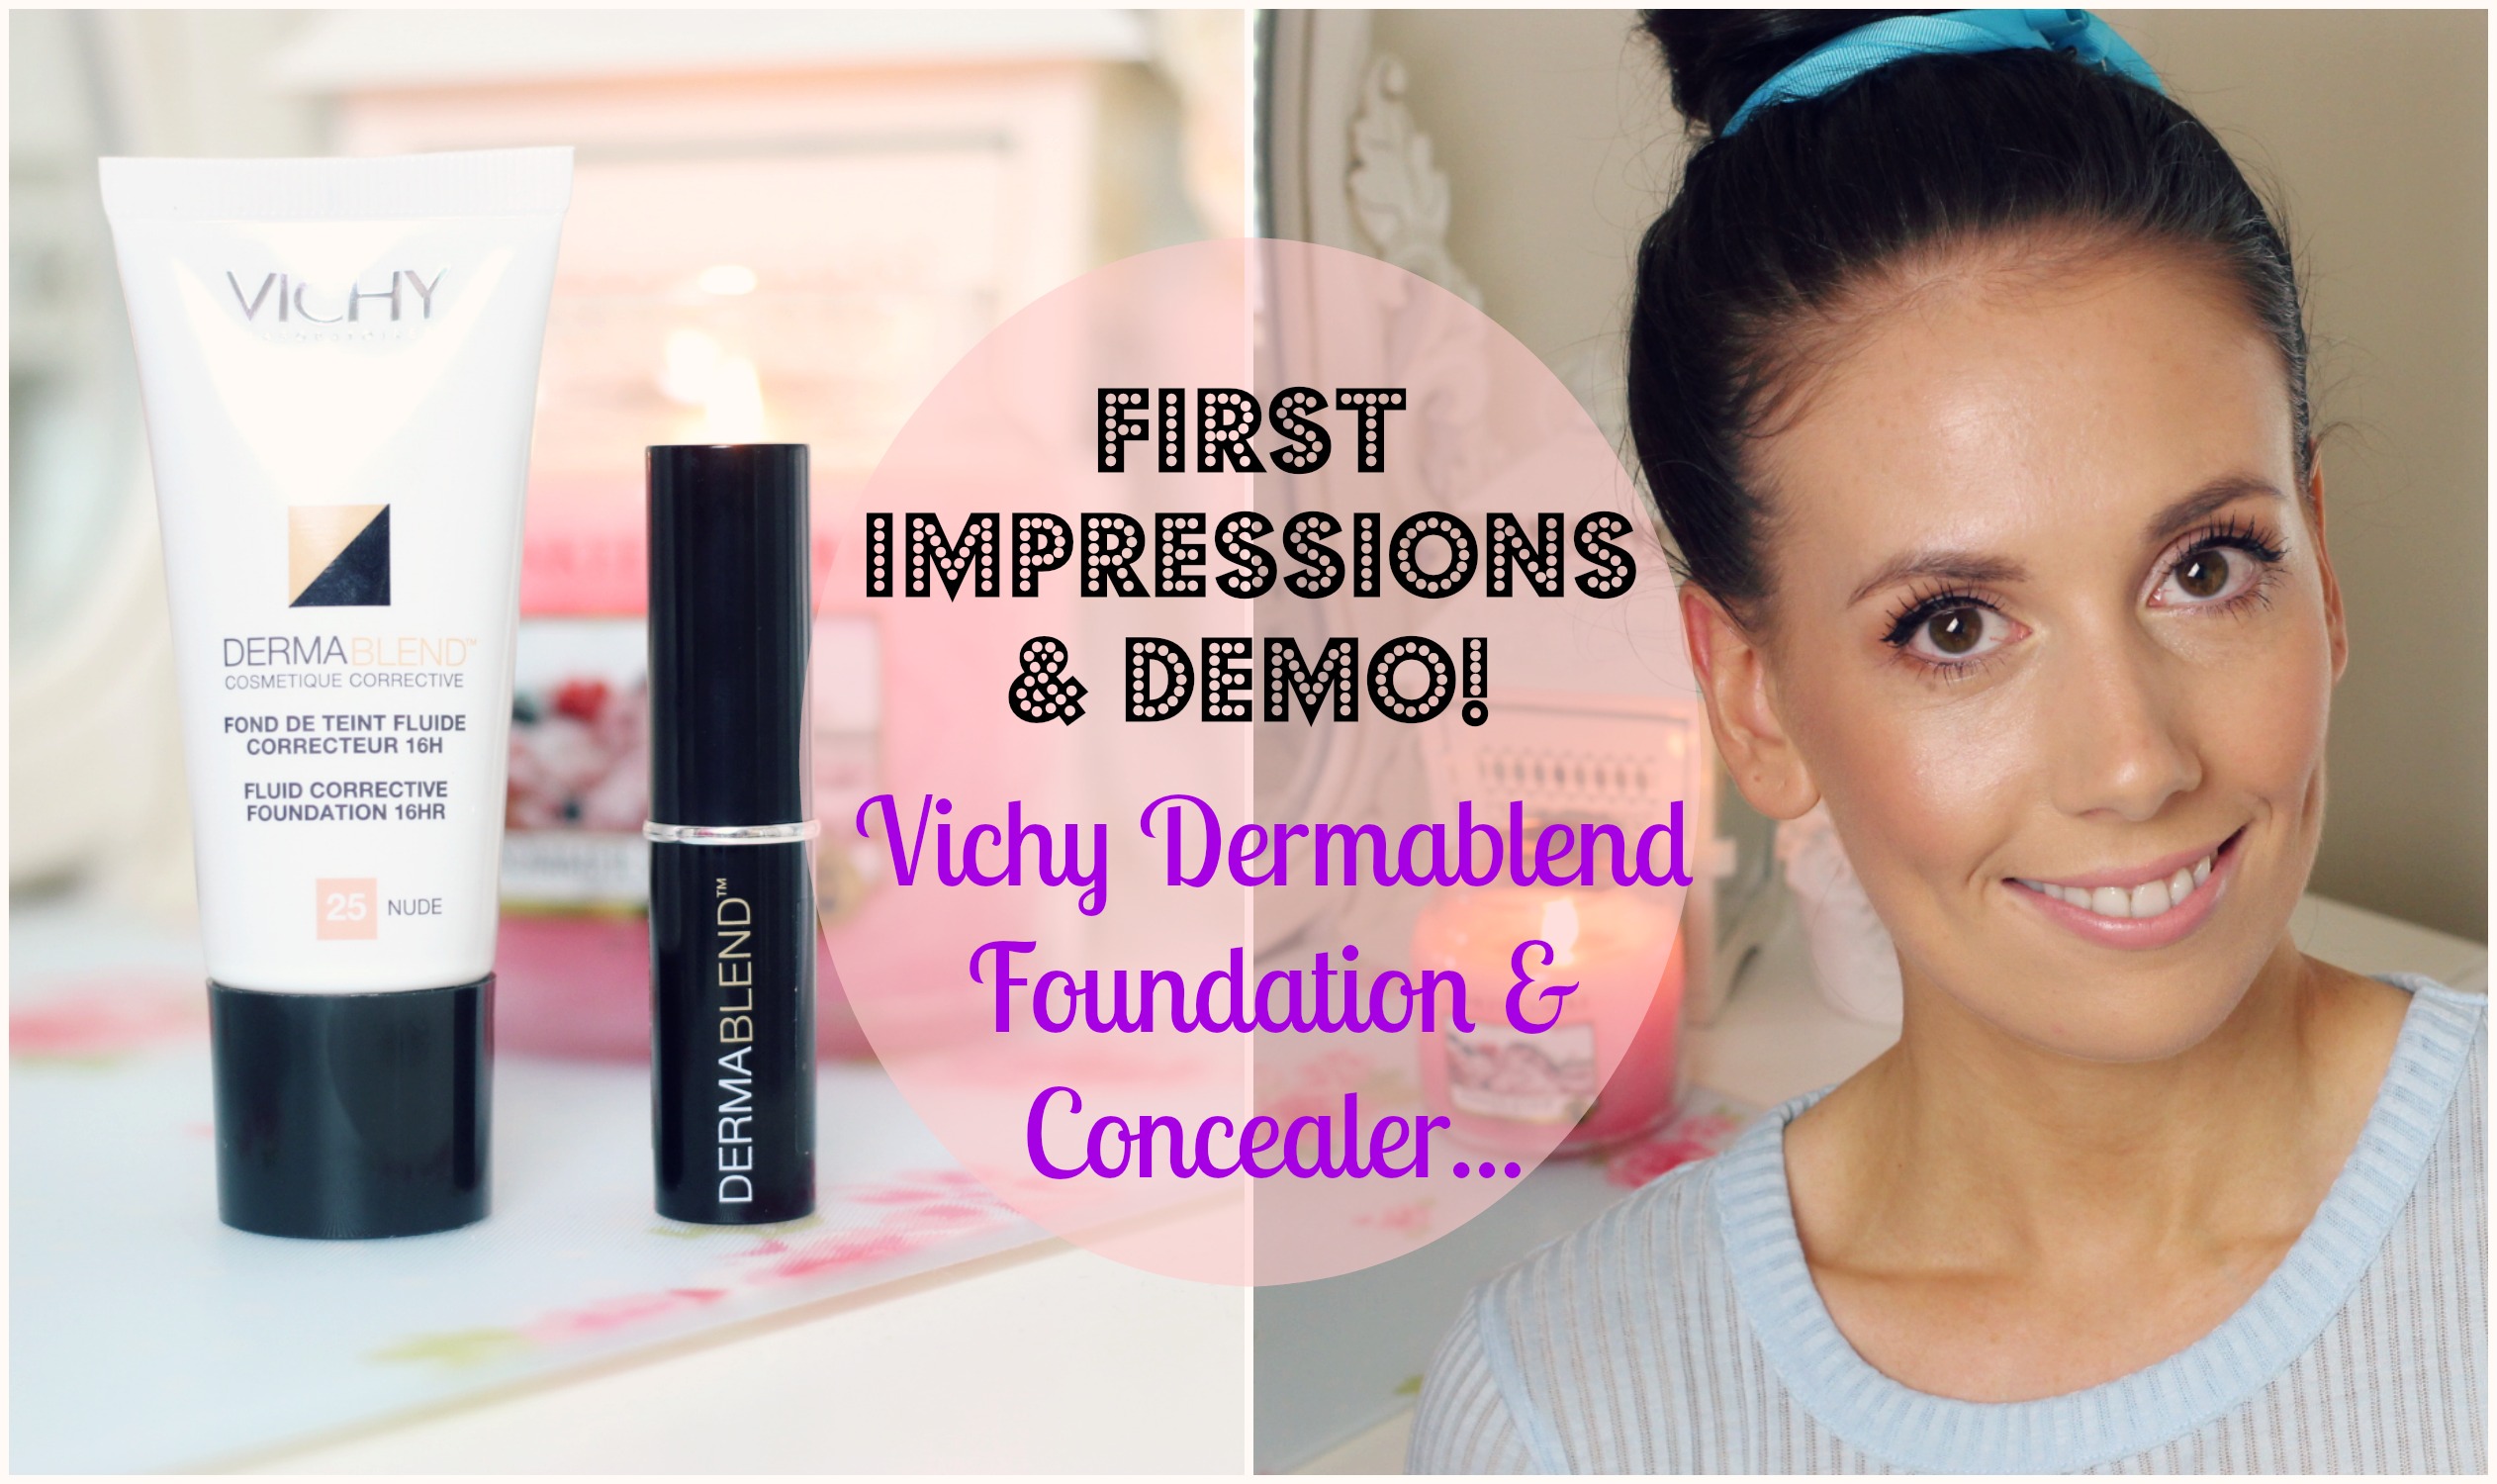 Vichy Dermablend foundation and concealer